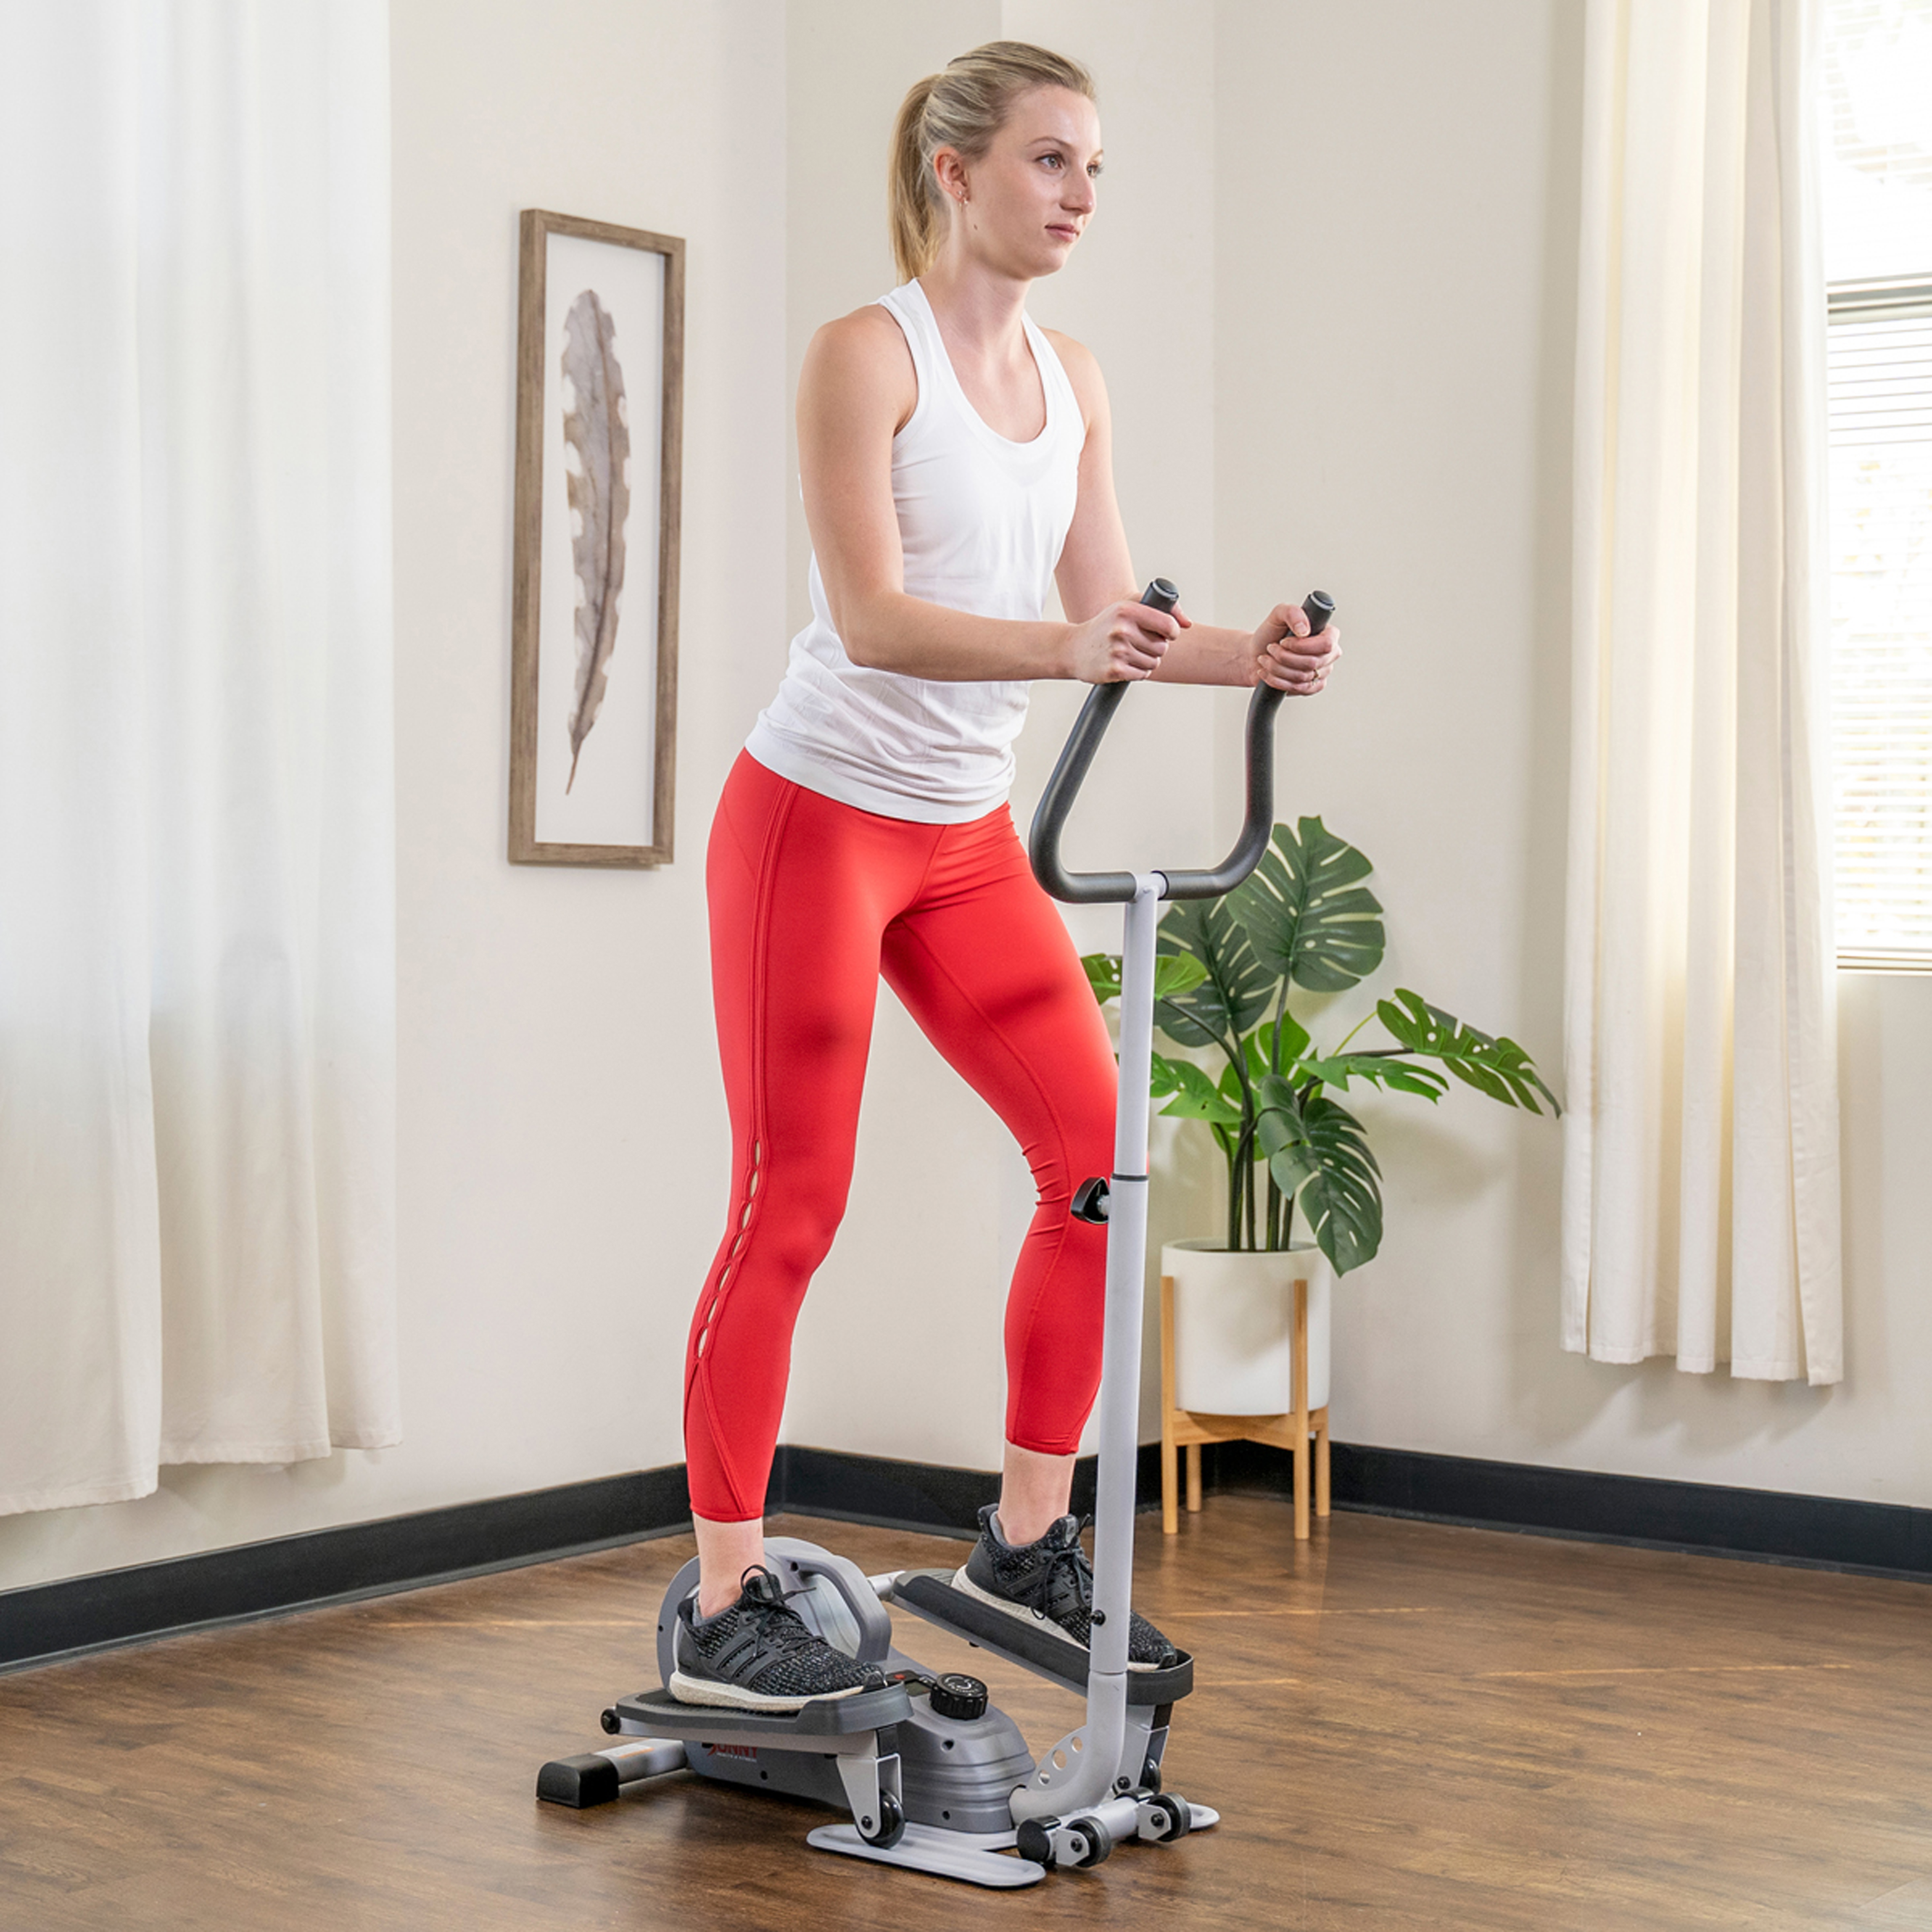 Sunny Health & Fitness Compact Magnetic Standing Elliptical Machine w/ Handlebars - Portable Workout Stepper for Home, SF-E3988 - image 14 of 18